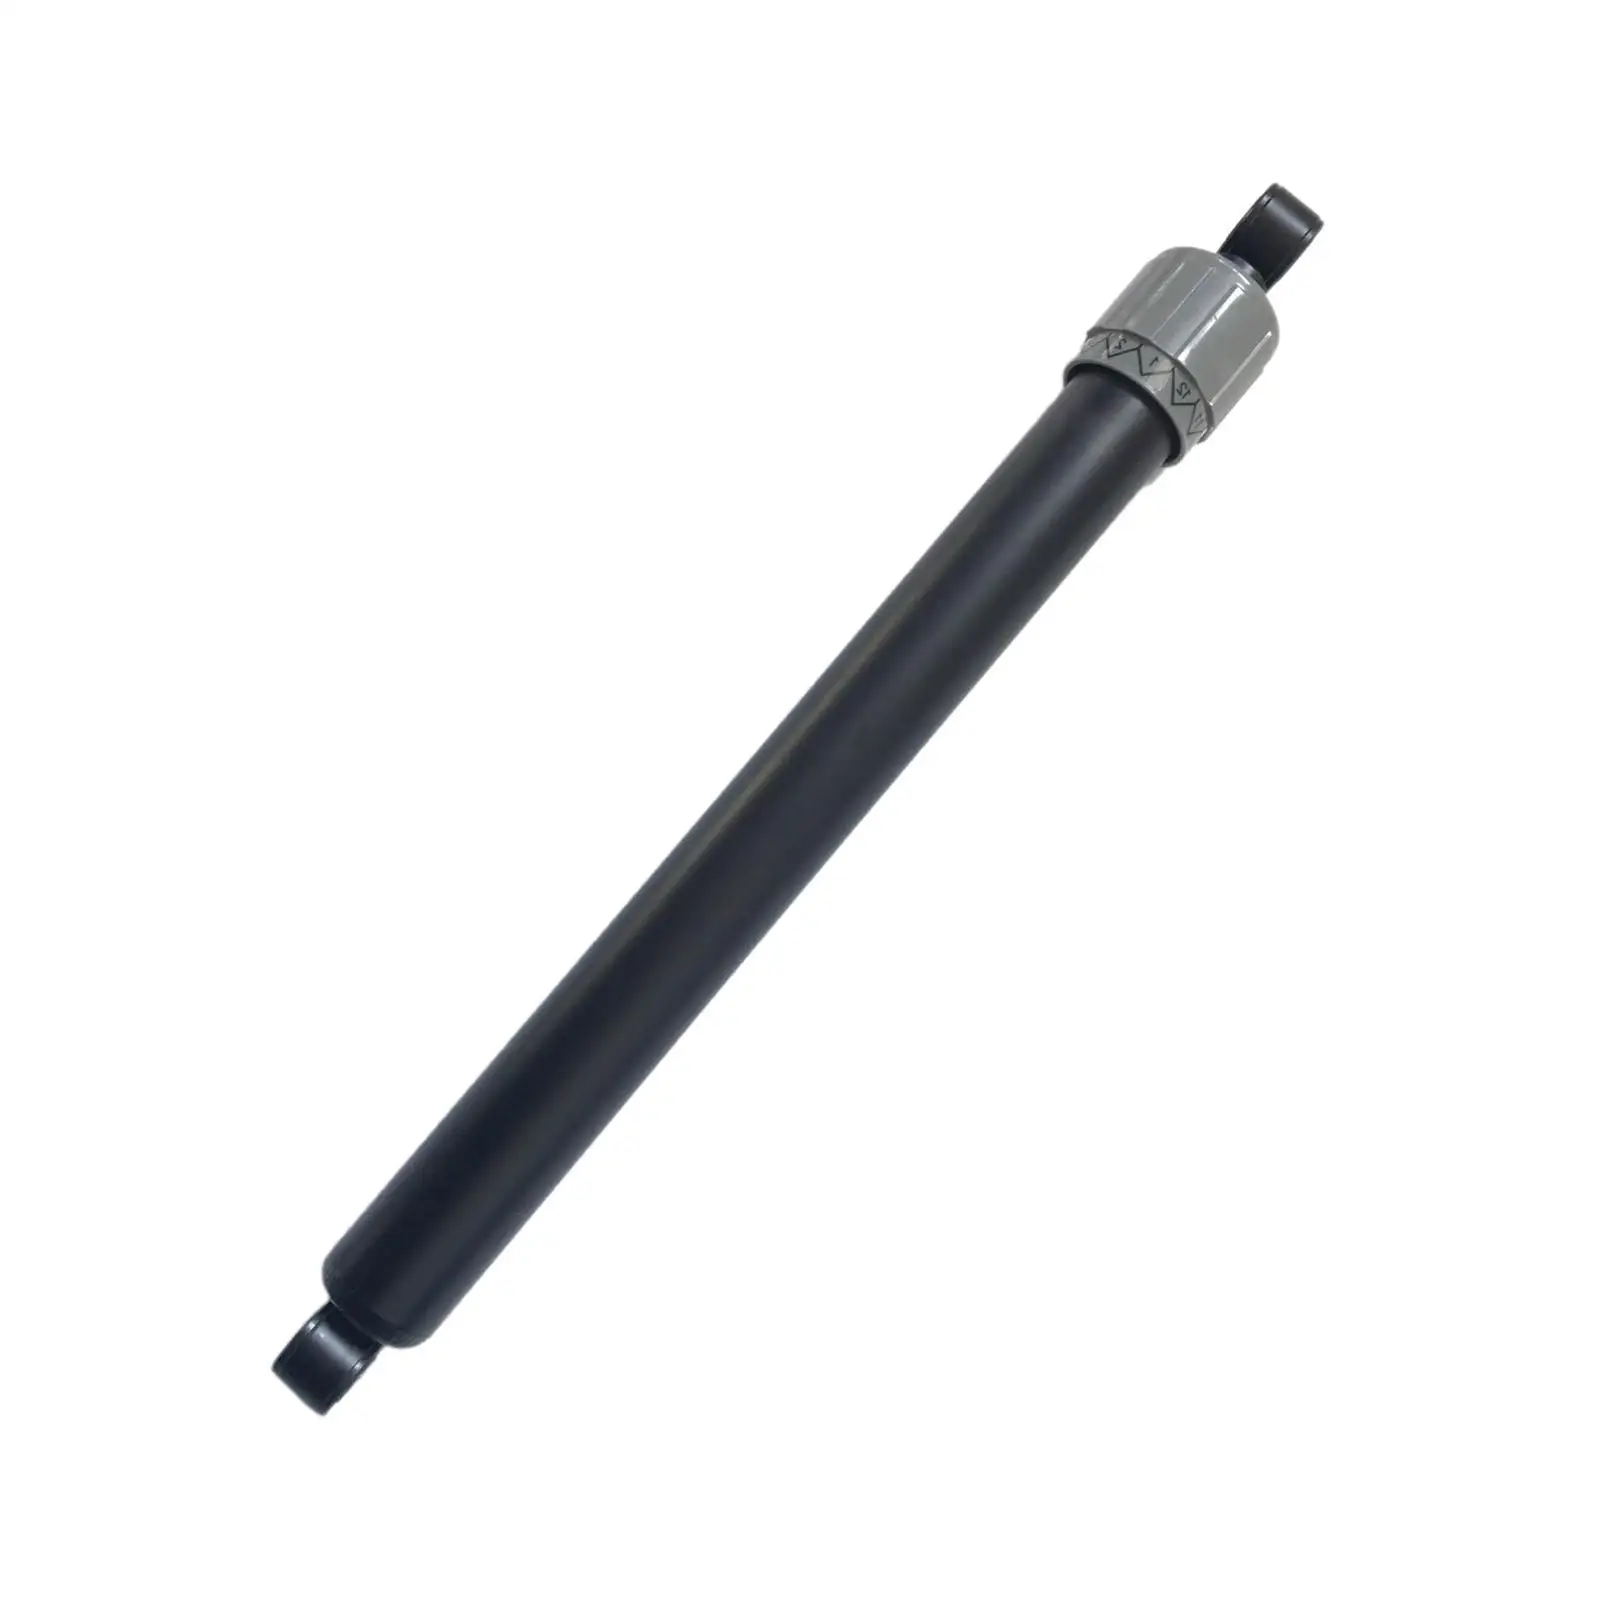 12-Speed Damper Stabilizer Replacement Modification Parts Household Adjustable Durable 440cm Regulator Gym for Rowing Machine